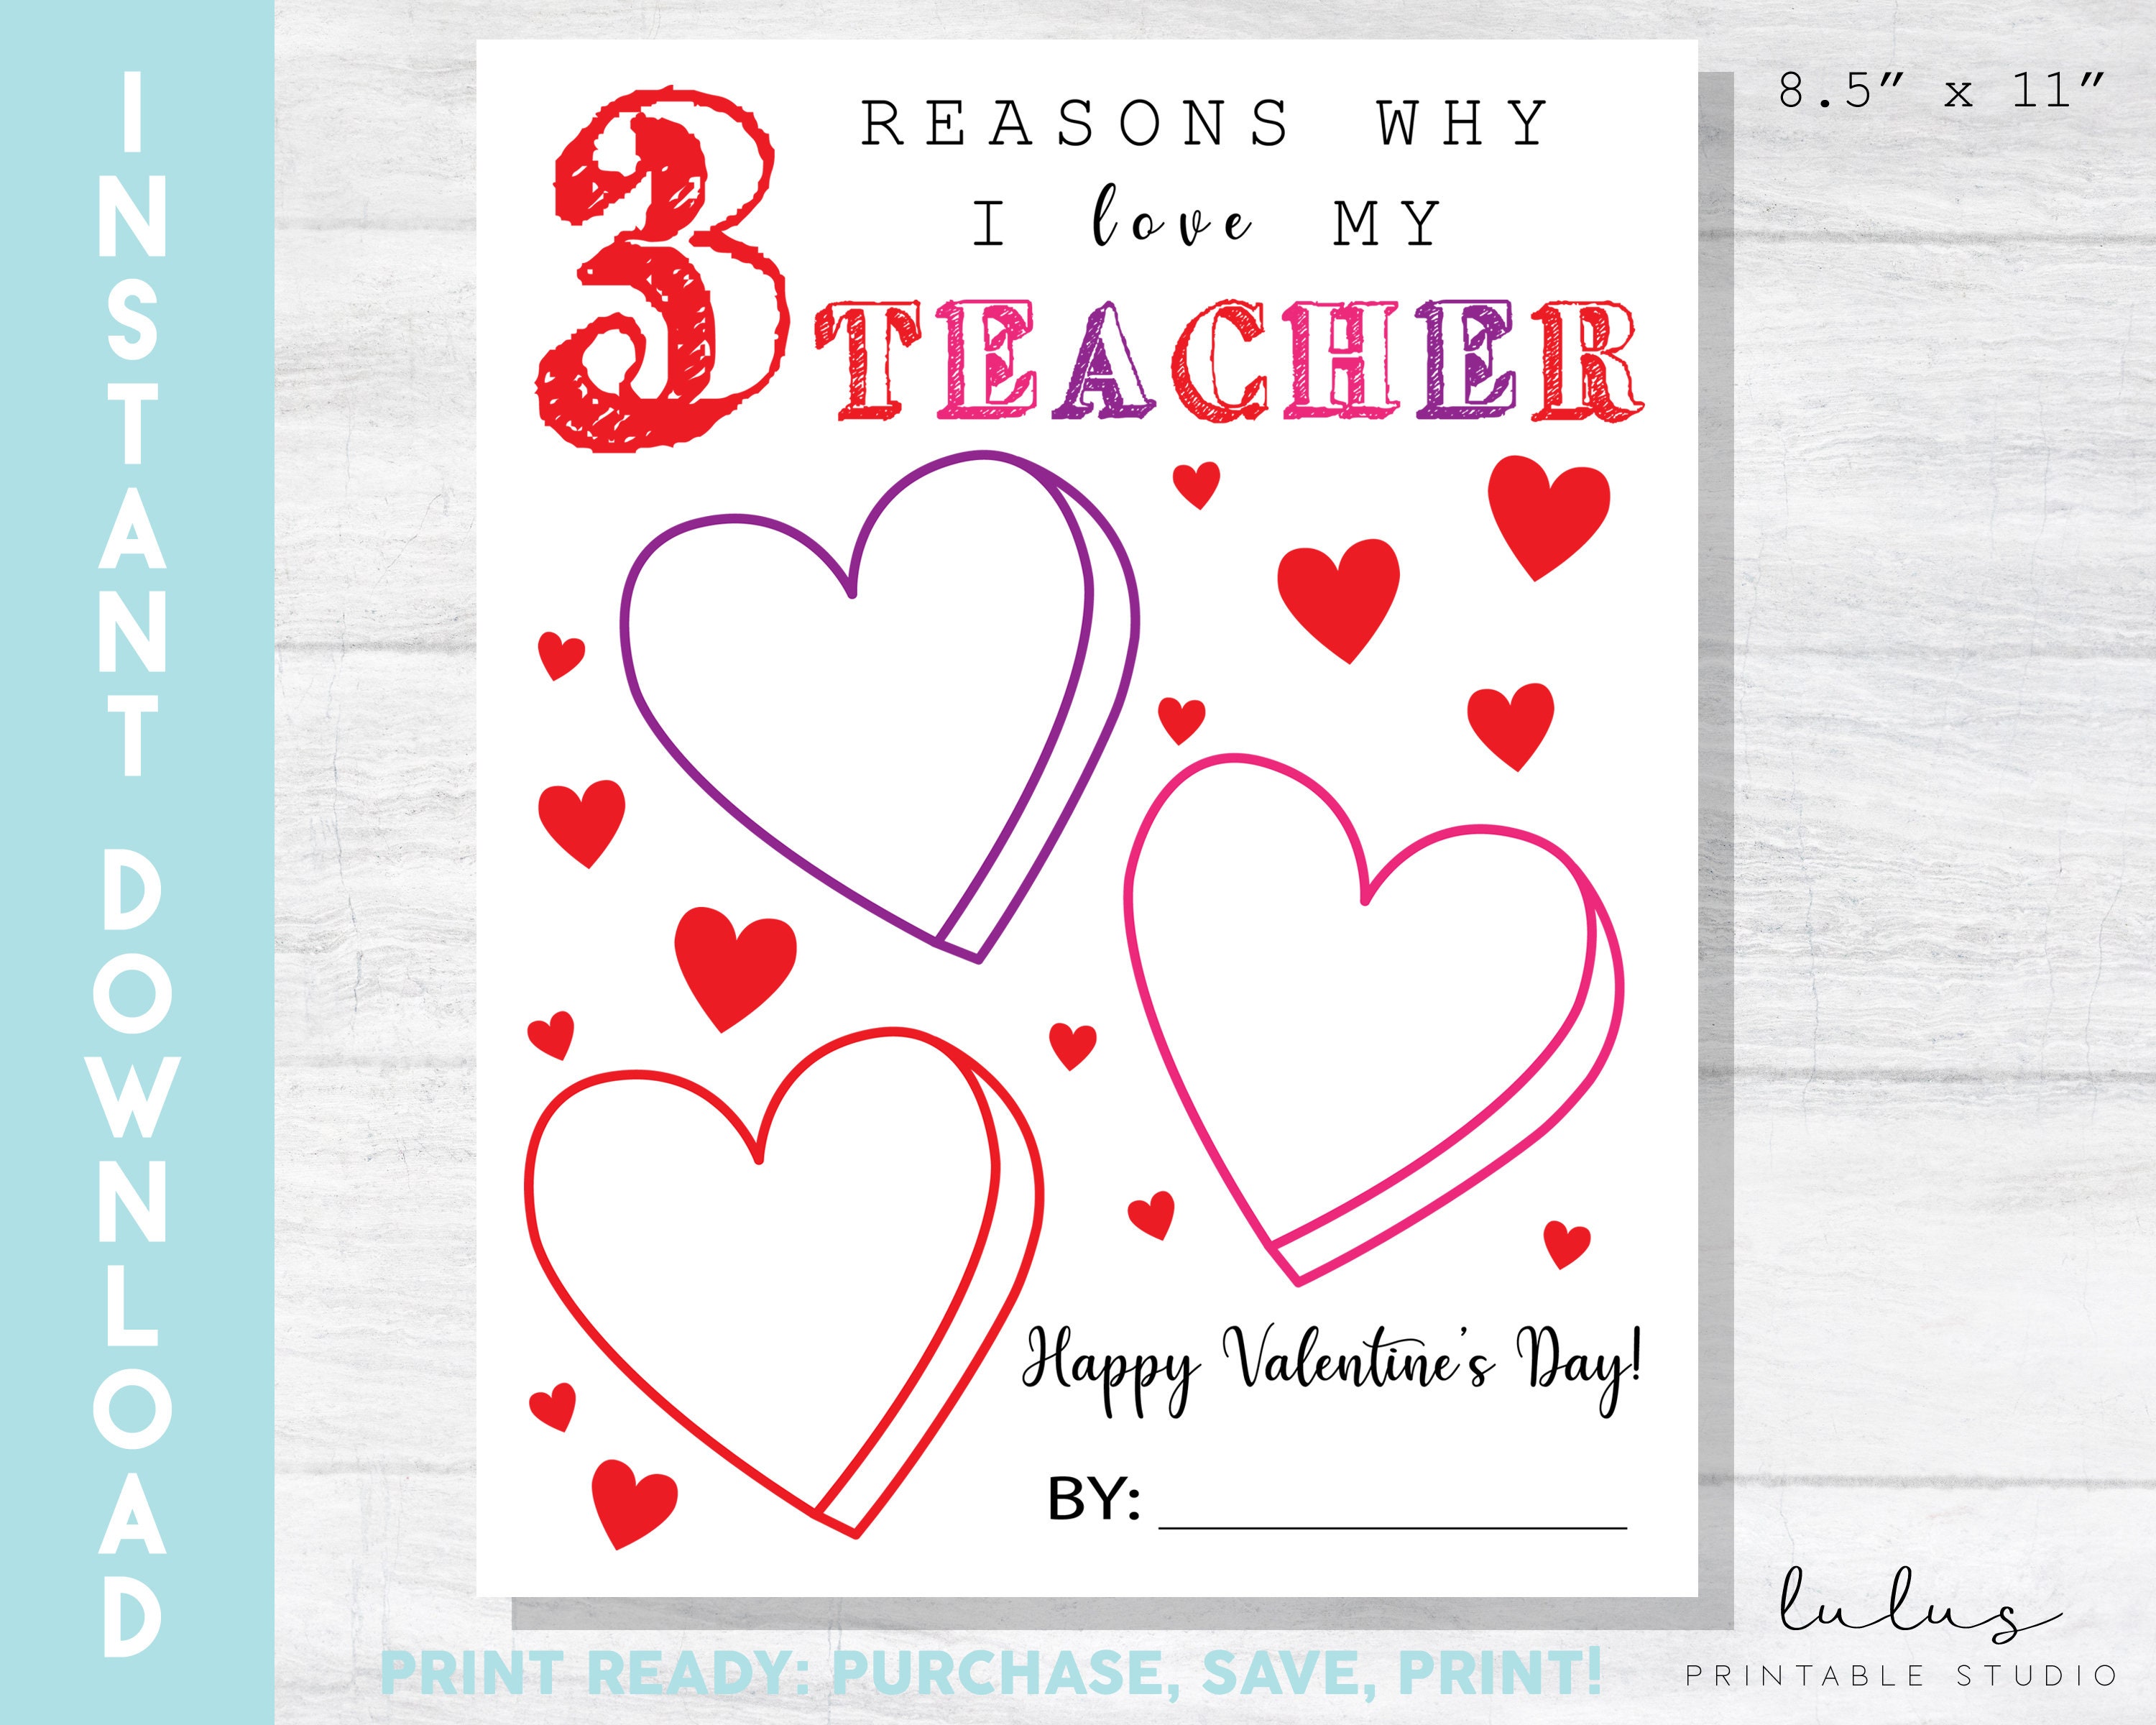 Printable Valentine for Teachers They'll Actually Want & Love - Aesthetic  Journeys Designs